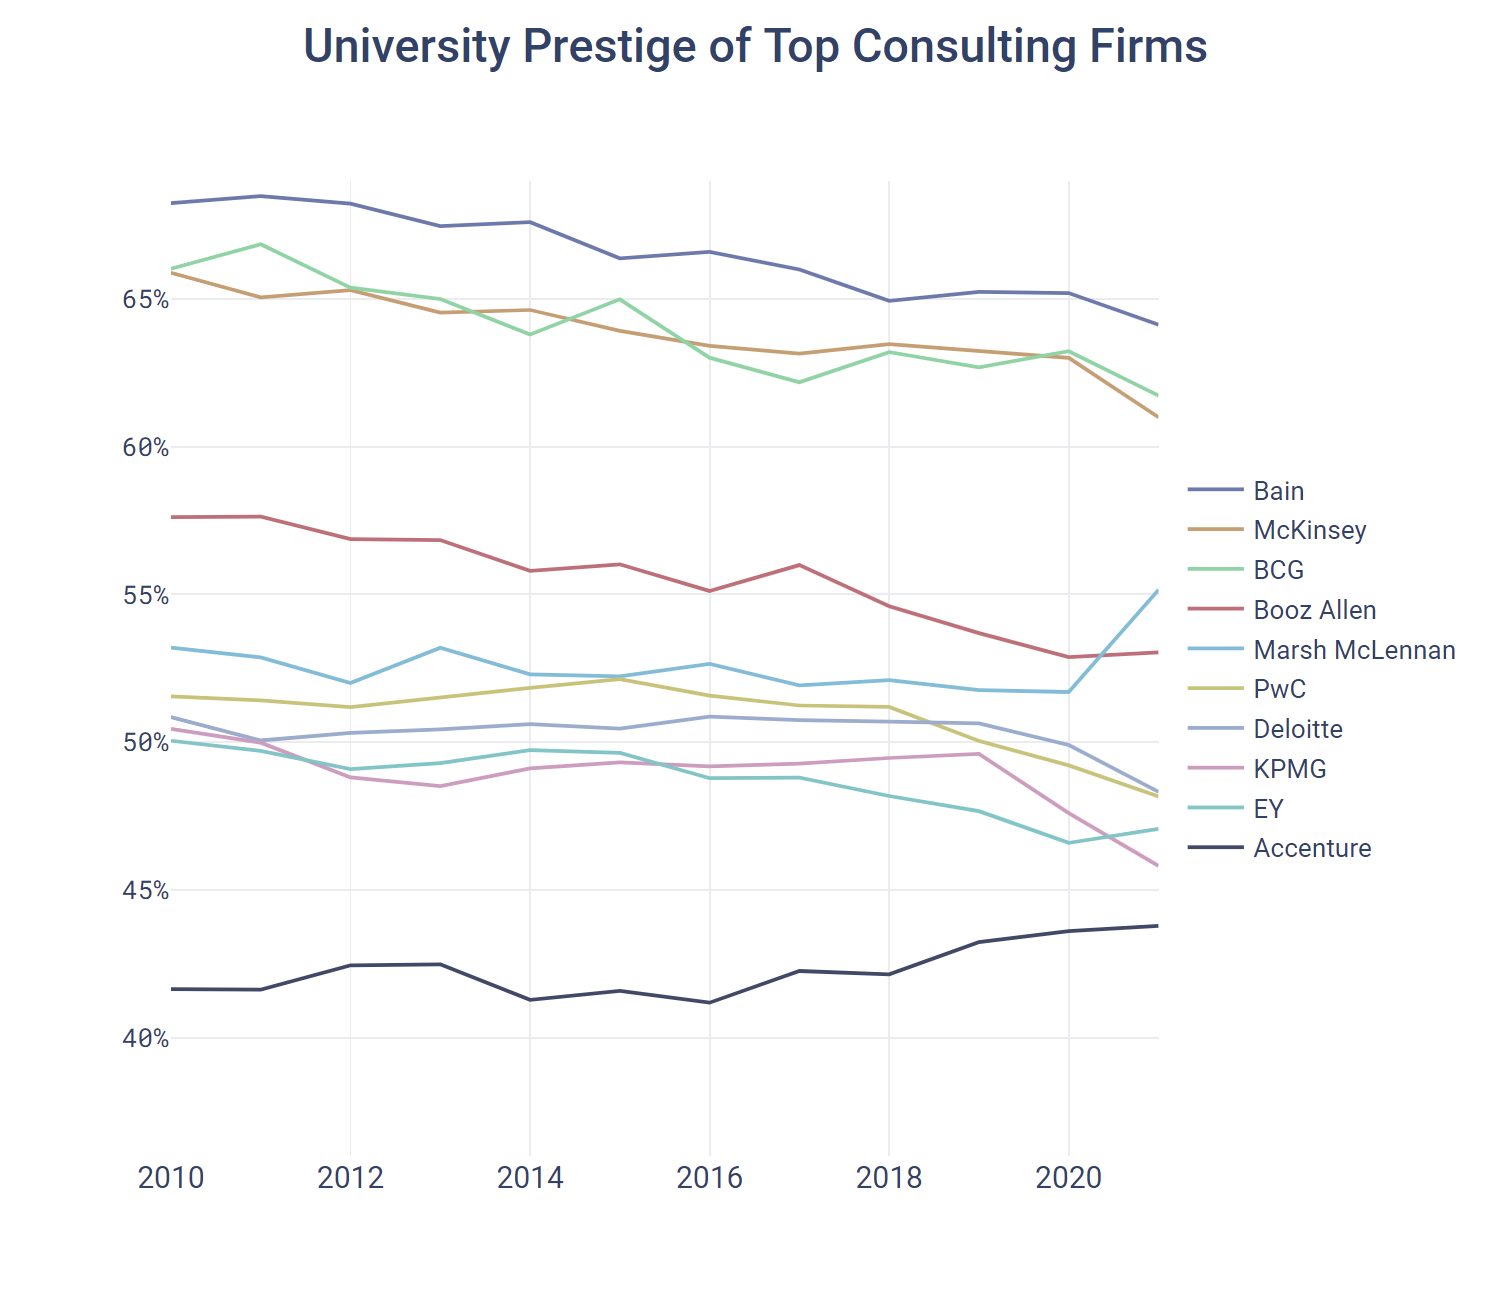 University Prestige of Top Consulting Firms